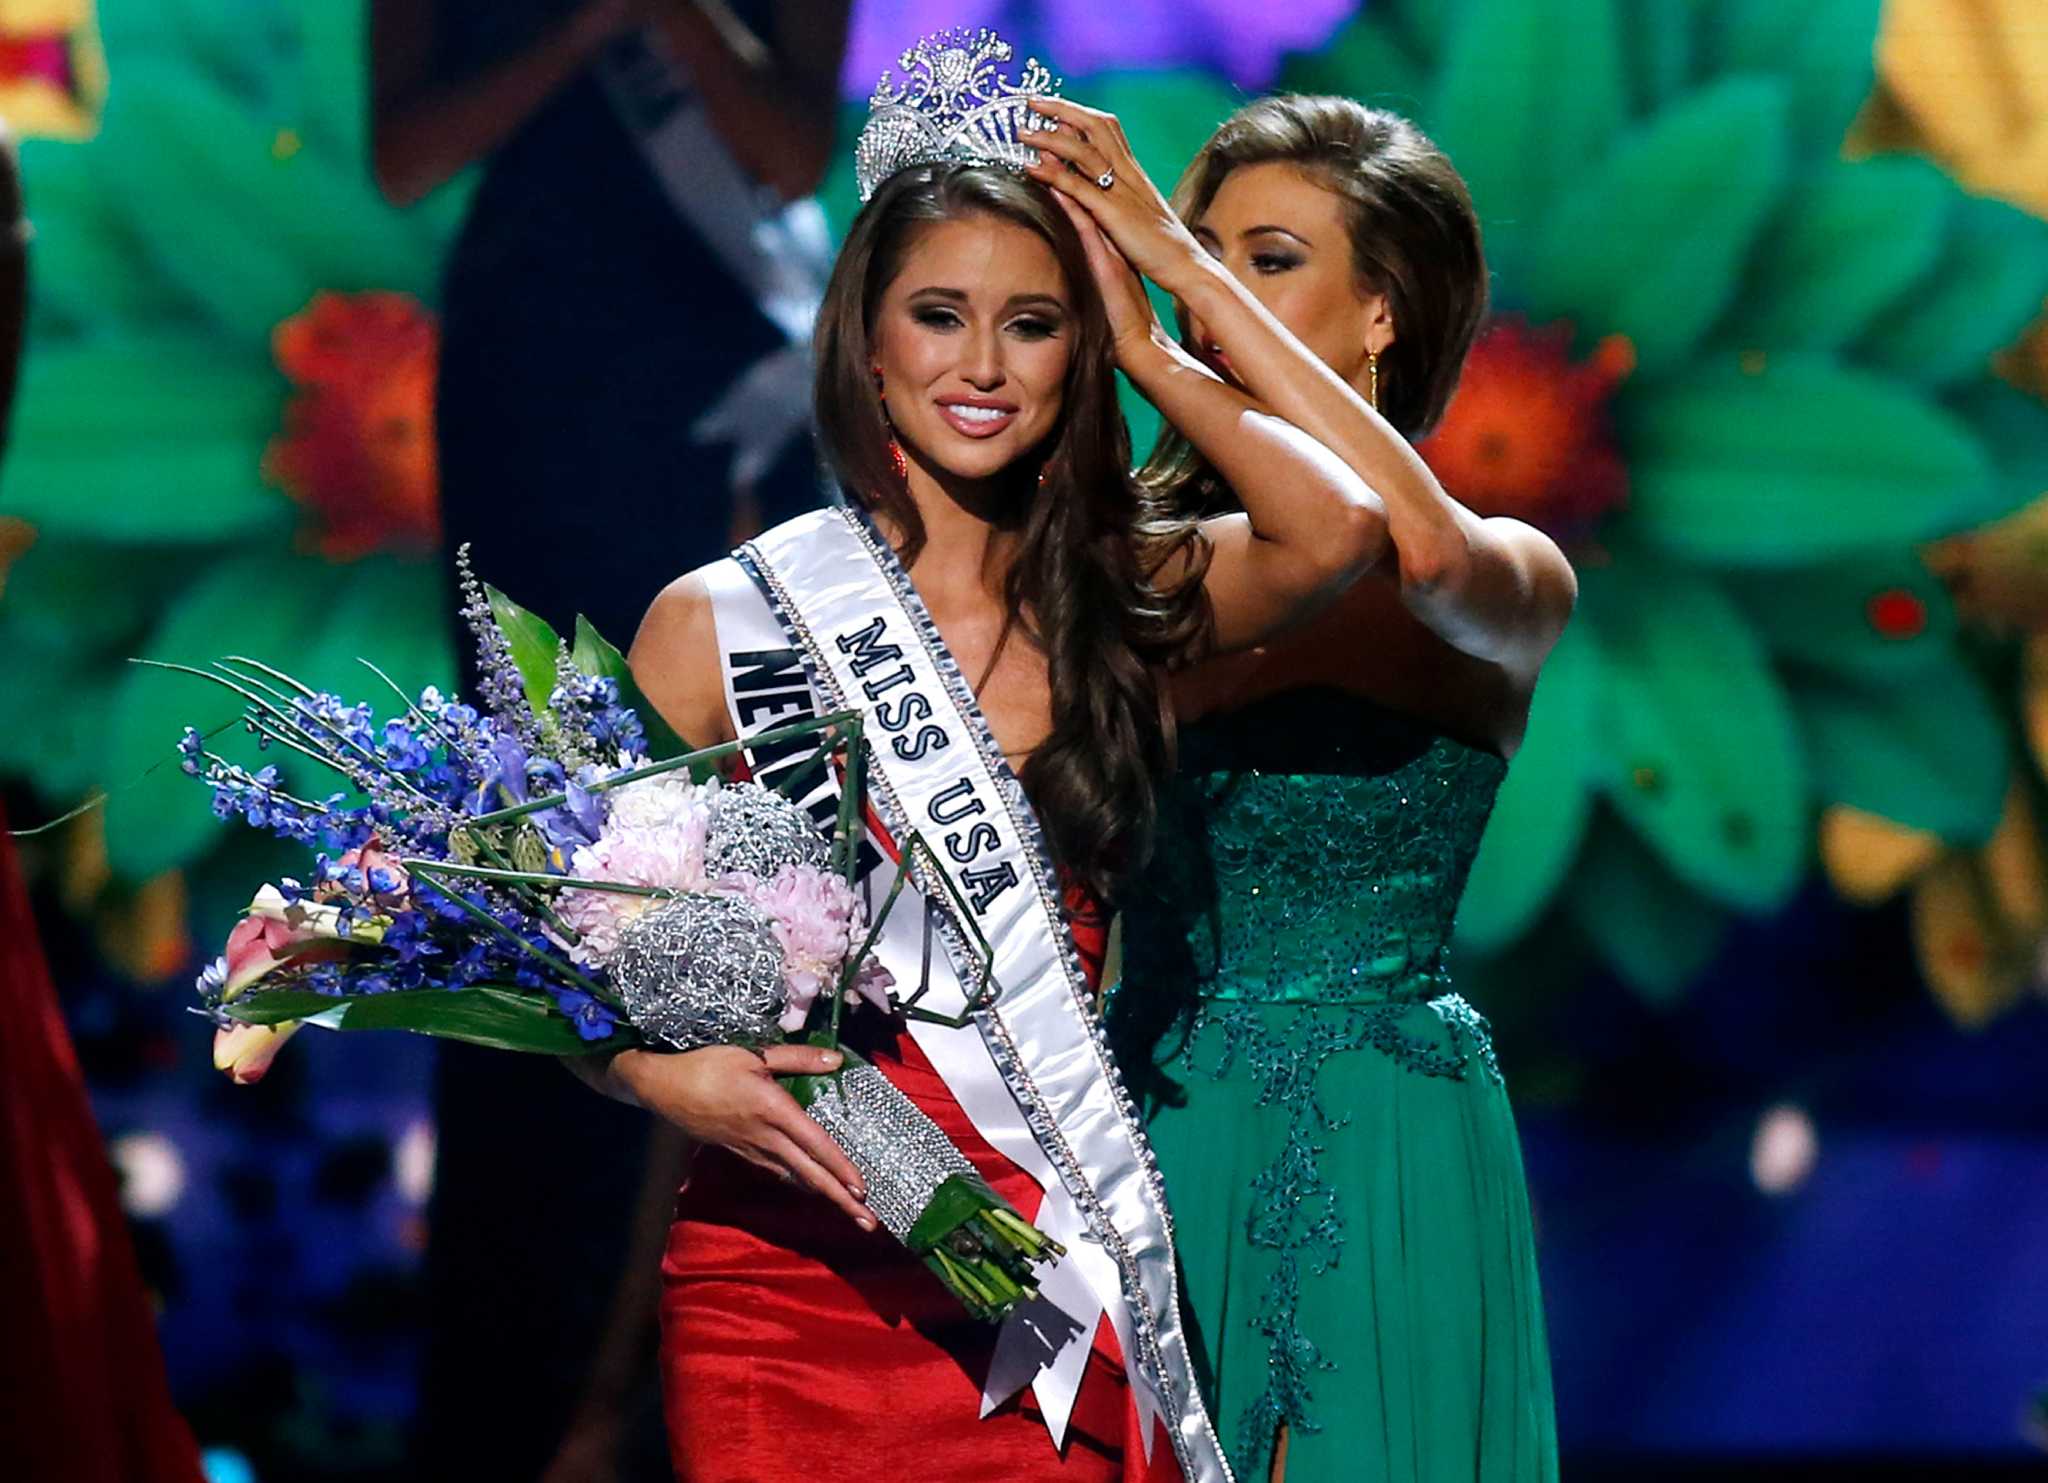 Miss Nevada Nia Sanchez crowned as 63rd Miss USA